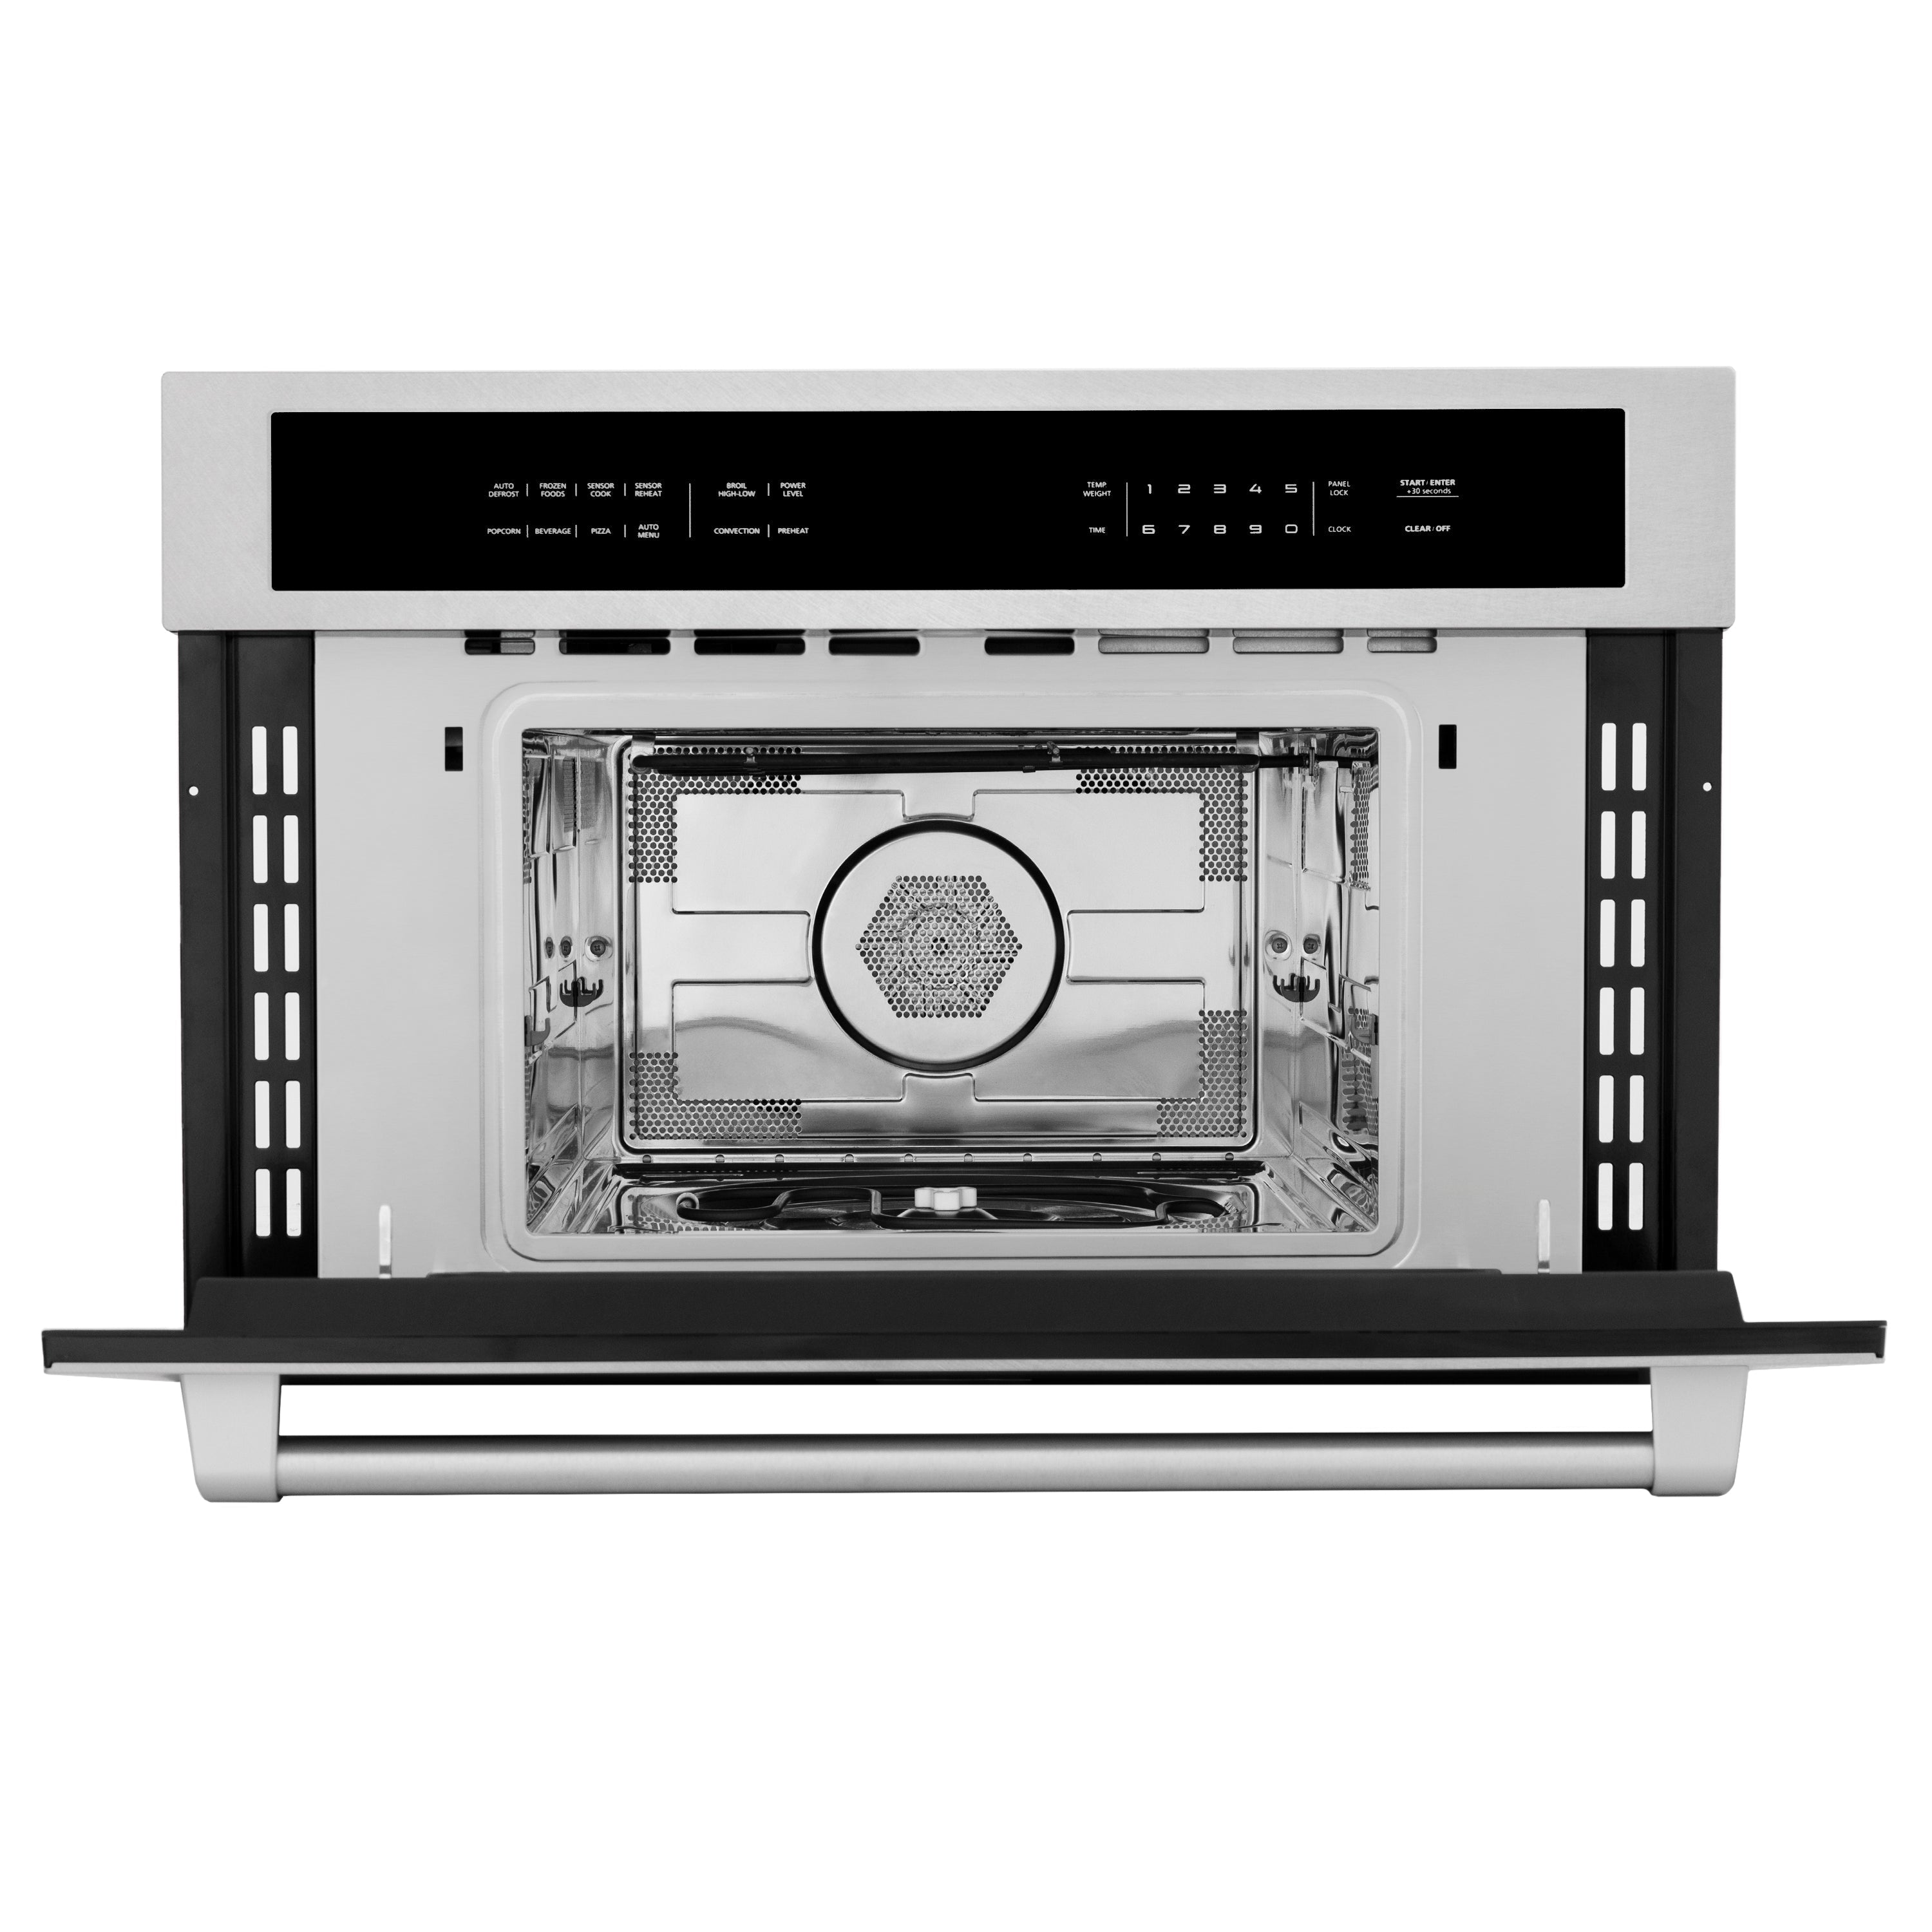 ZLINE 30 In. Microwave Oven in DuraSnow Stainless Steel with Traditional Handle (MWO-30-SS) - New Star Living